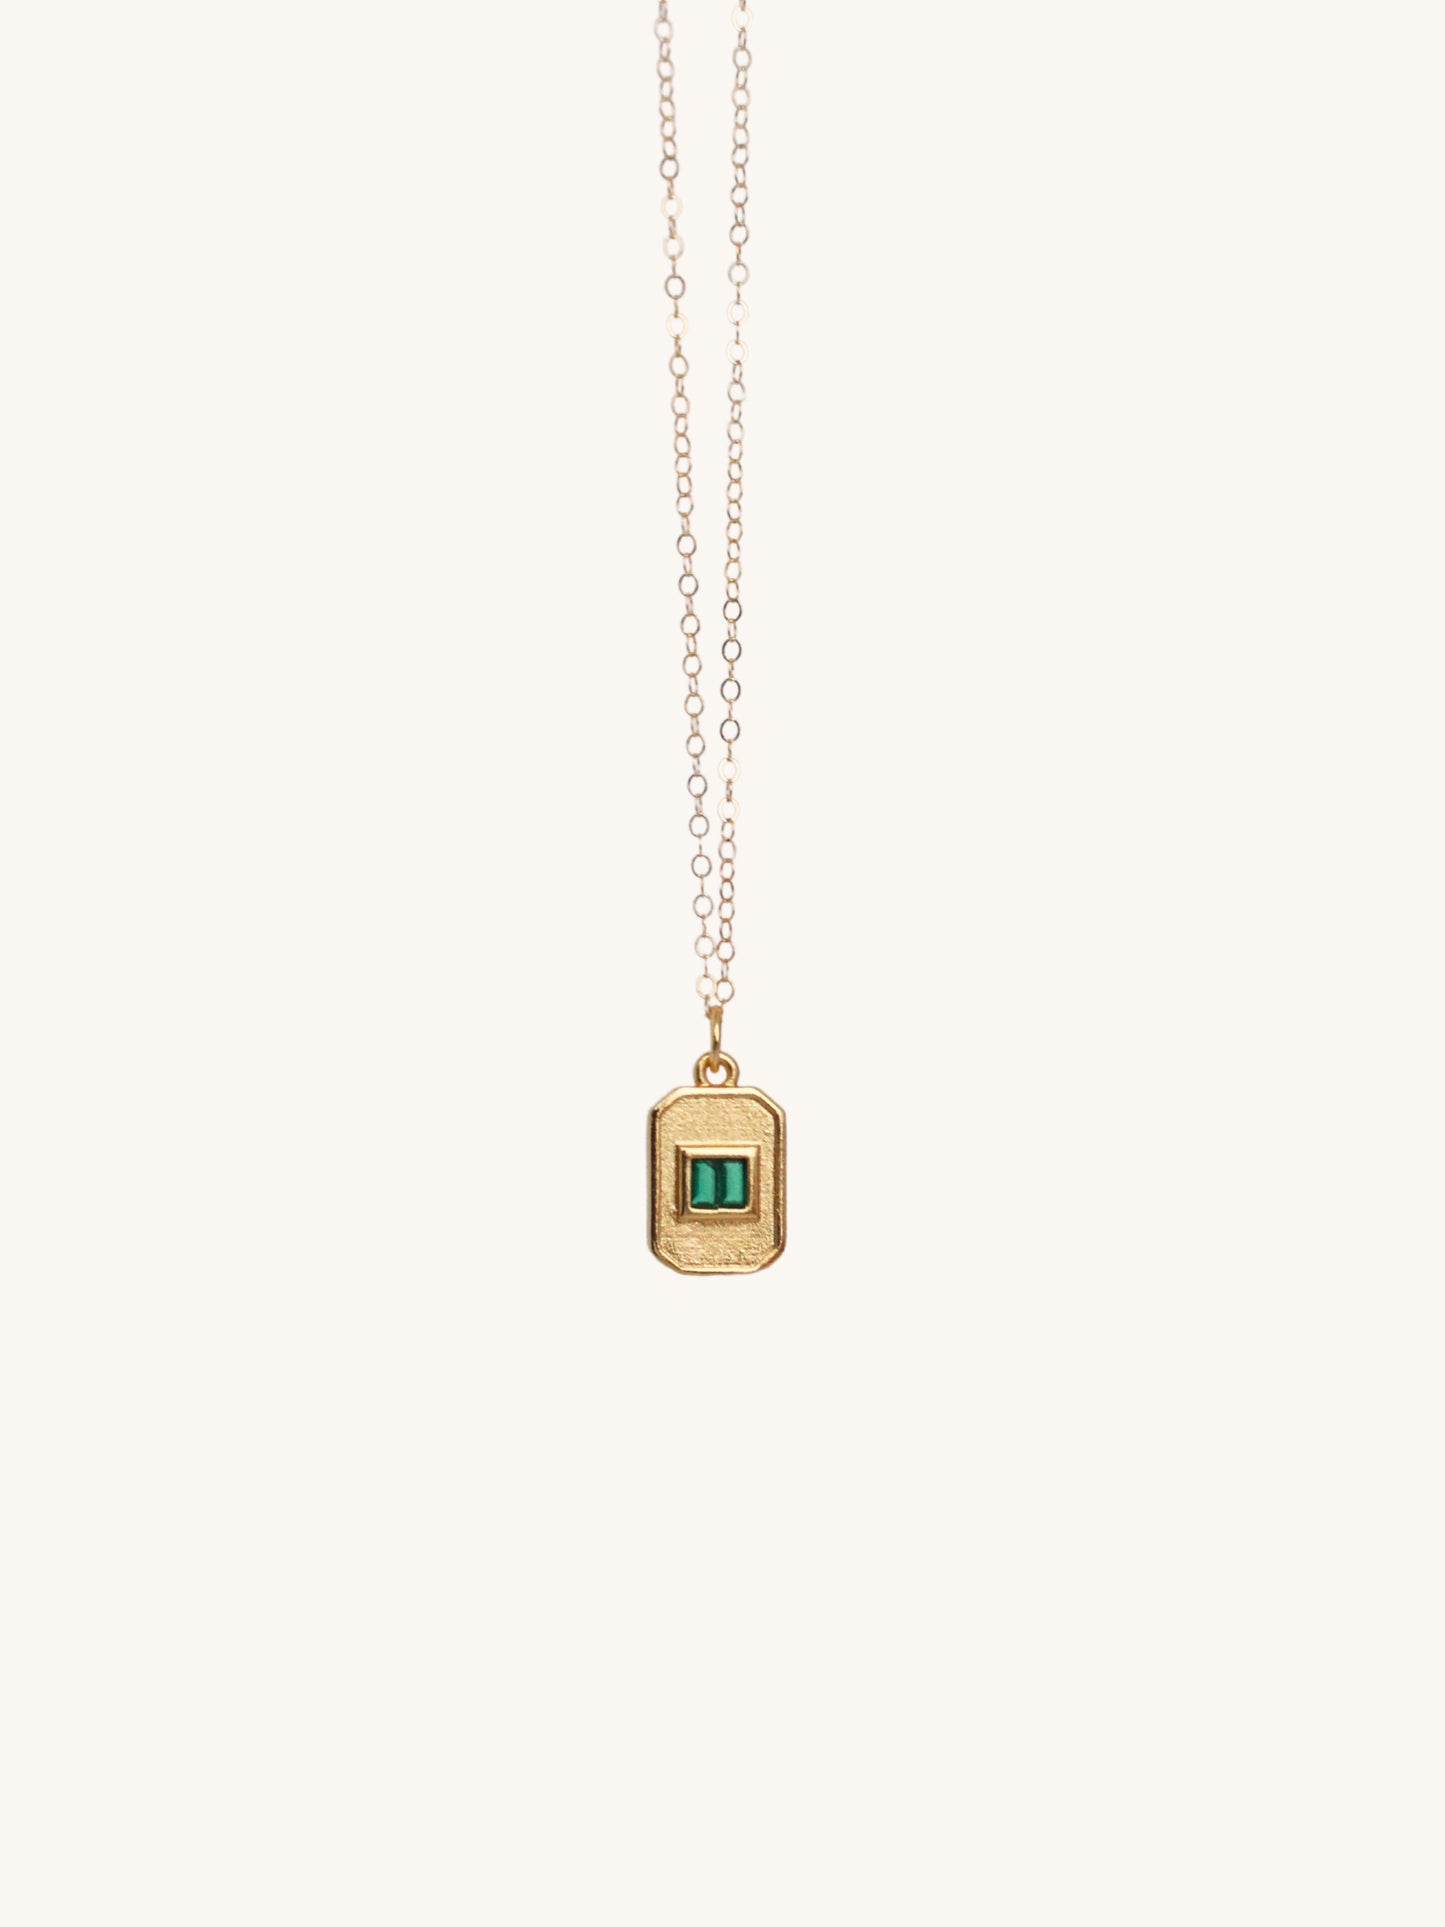 Dainty emerald necklace